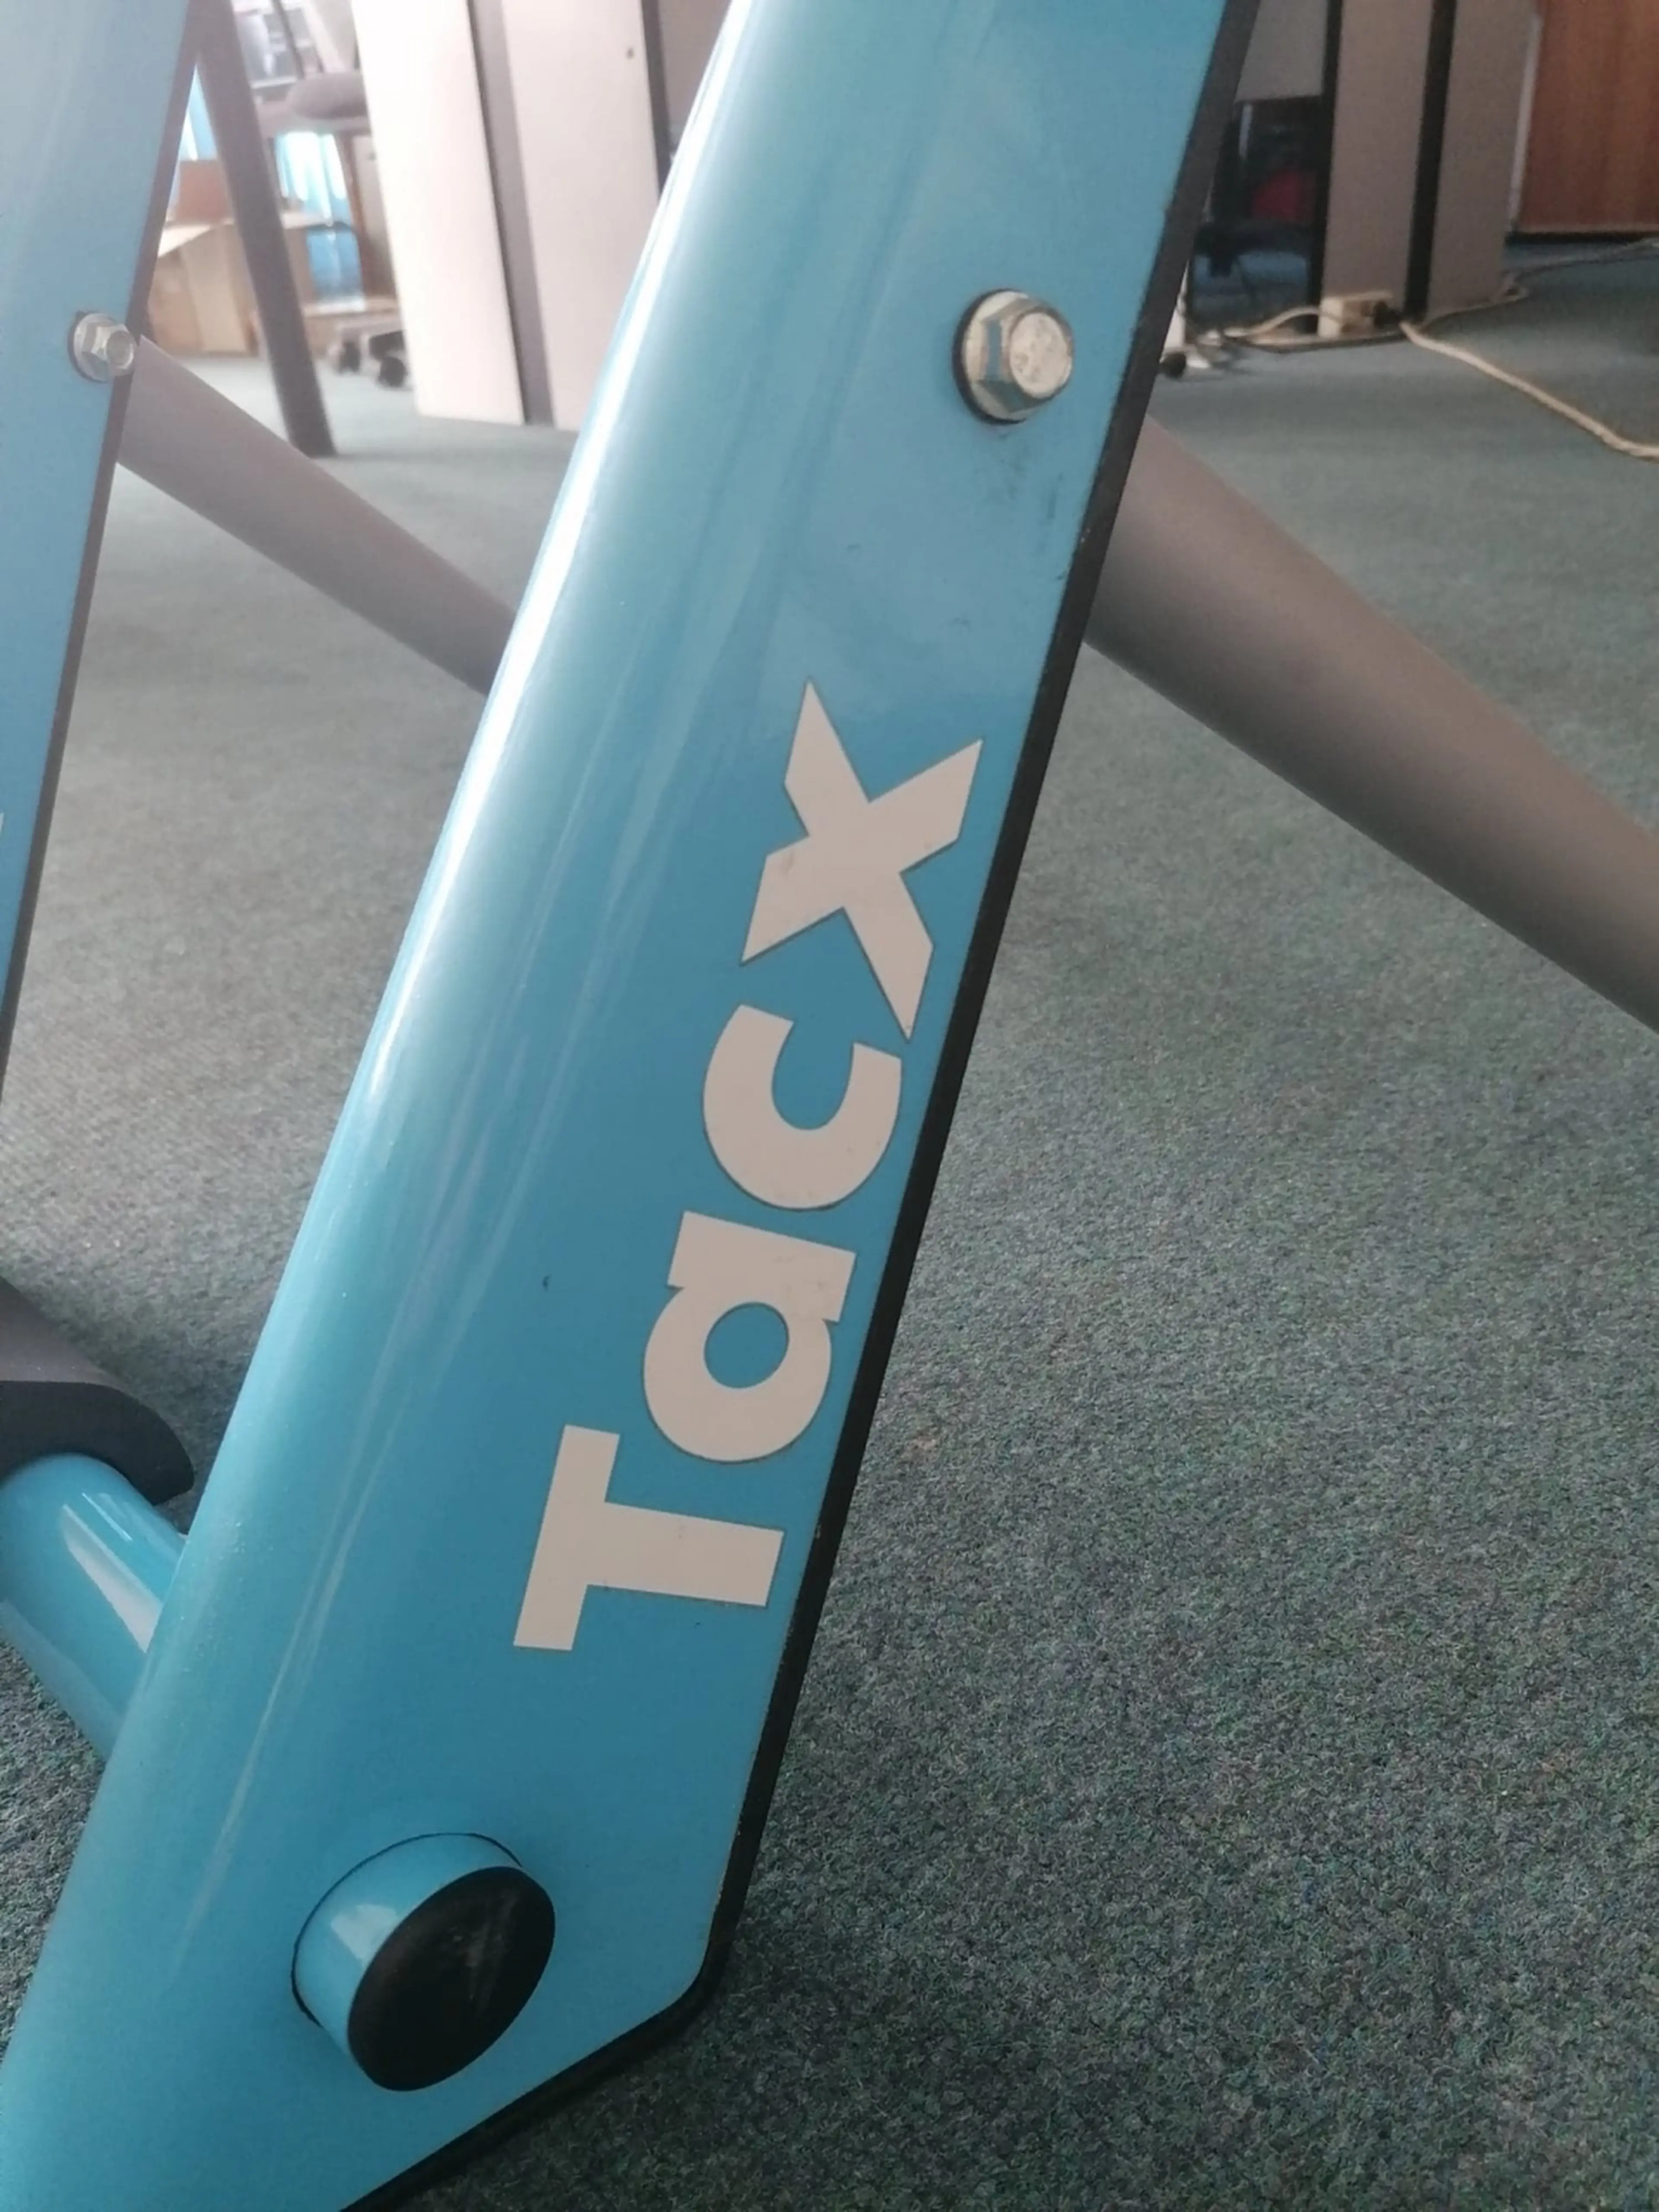 7. Home Trainer Tacx